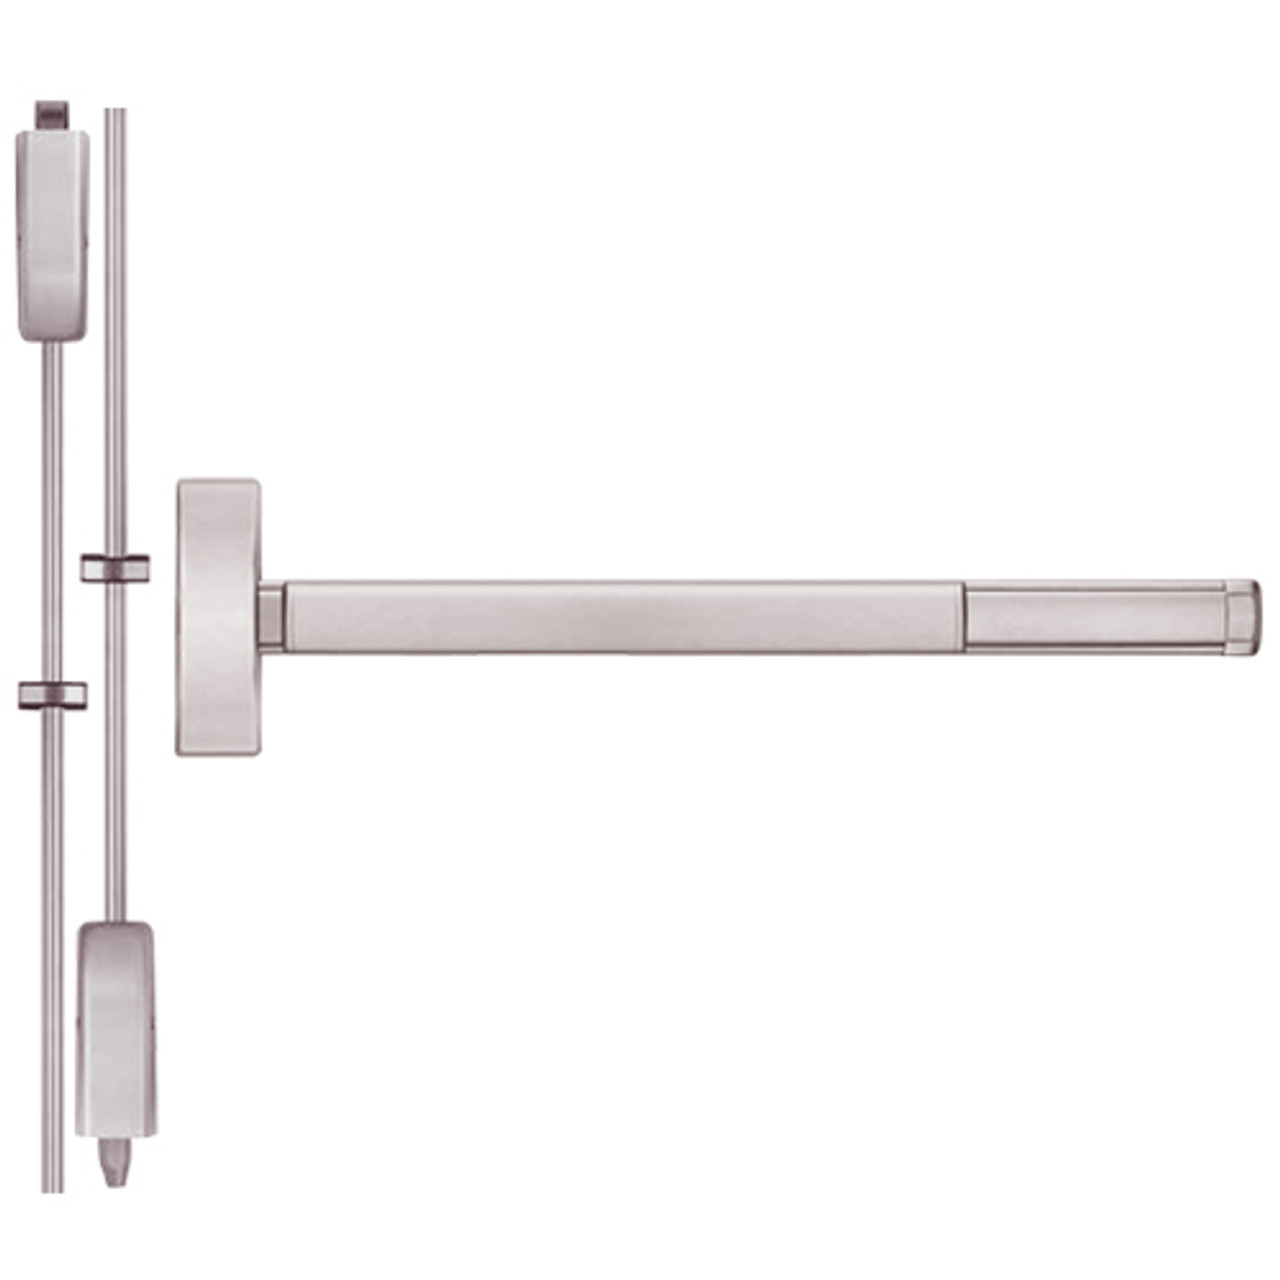 TS2214-628-36 PHI 2200 Series Non Fire Rated Apex Surface Vertical Rod Device with Touchbar Monitoring Switch Prepped for Lever-Knob Always Active in Satin Aluminum Finish